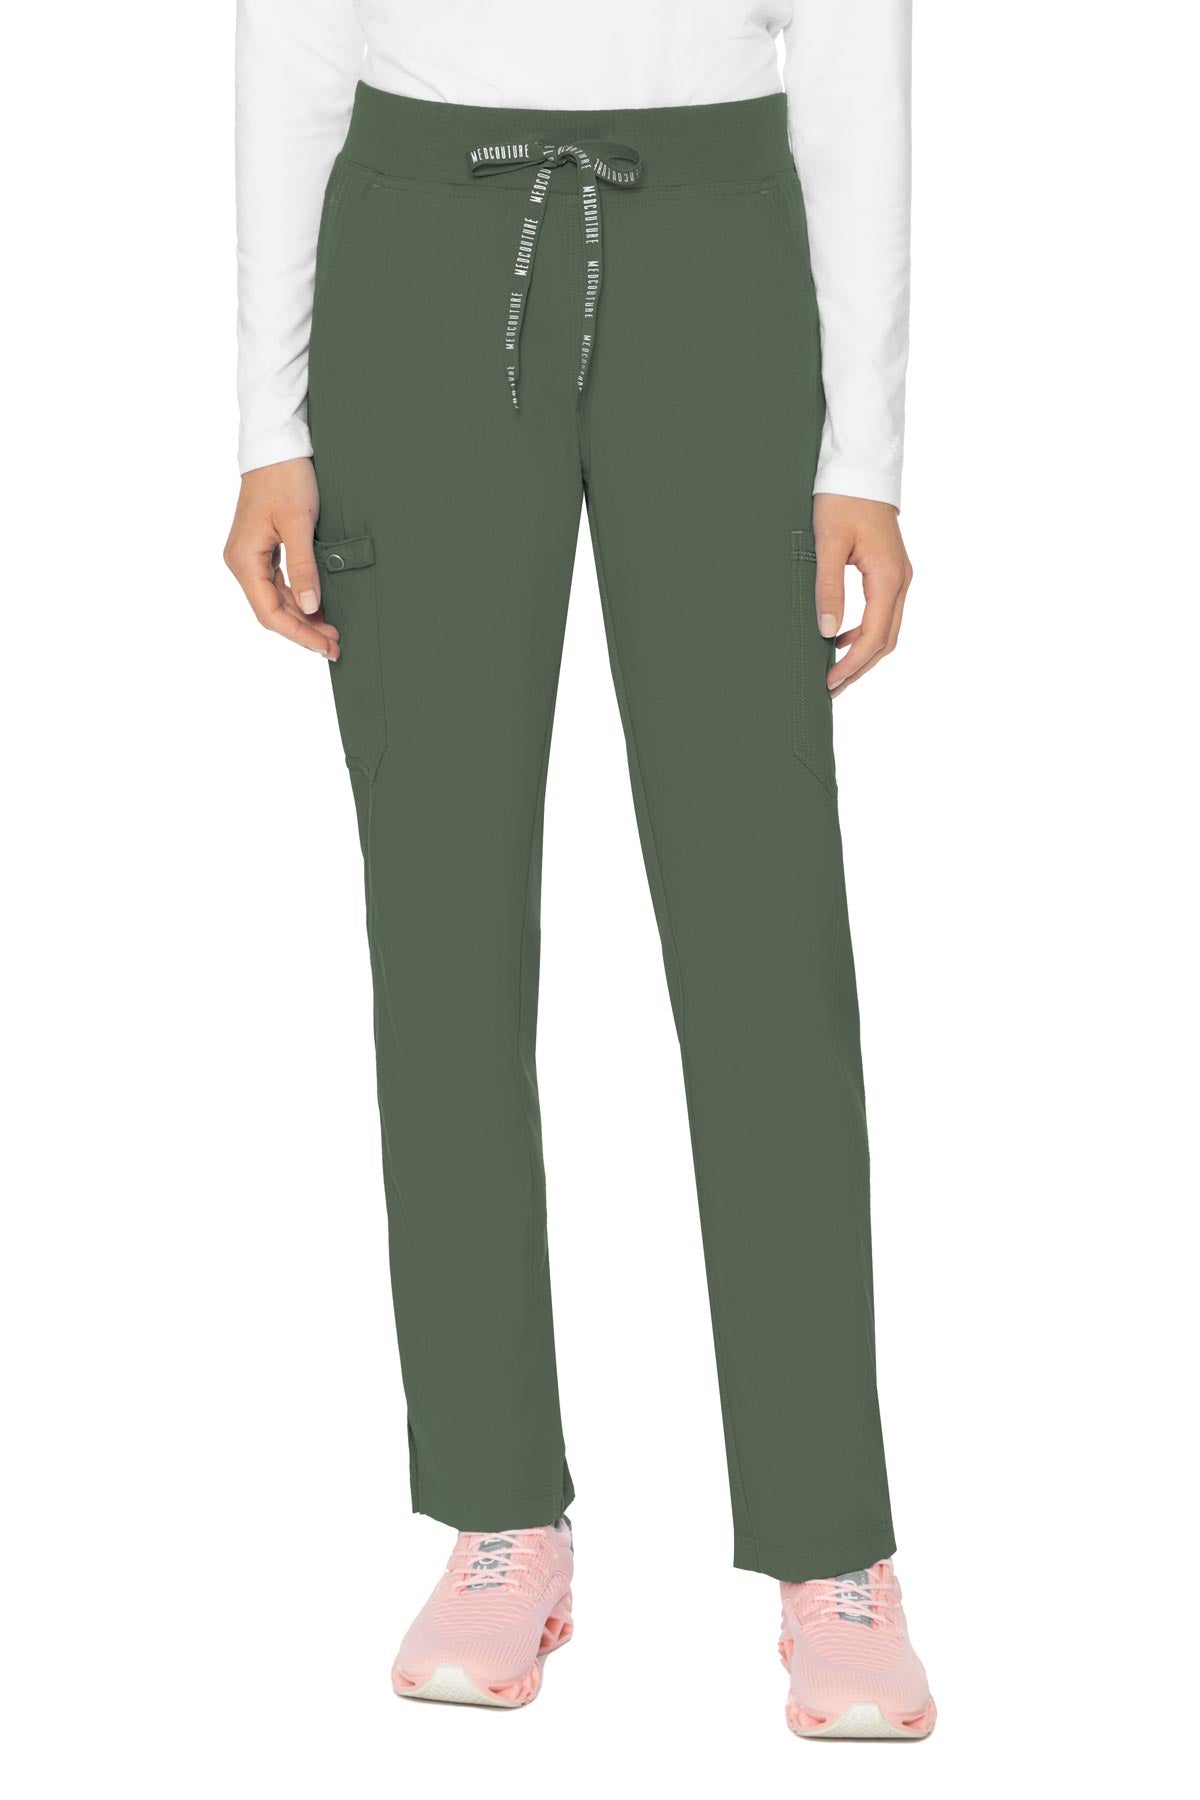 FIGS Grey Livingston Scrub Pants with Green Drawstring in Size XS